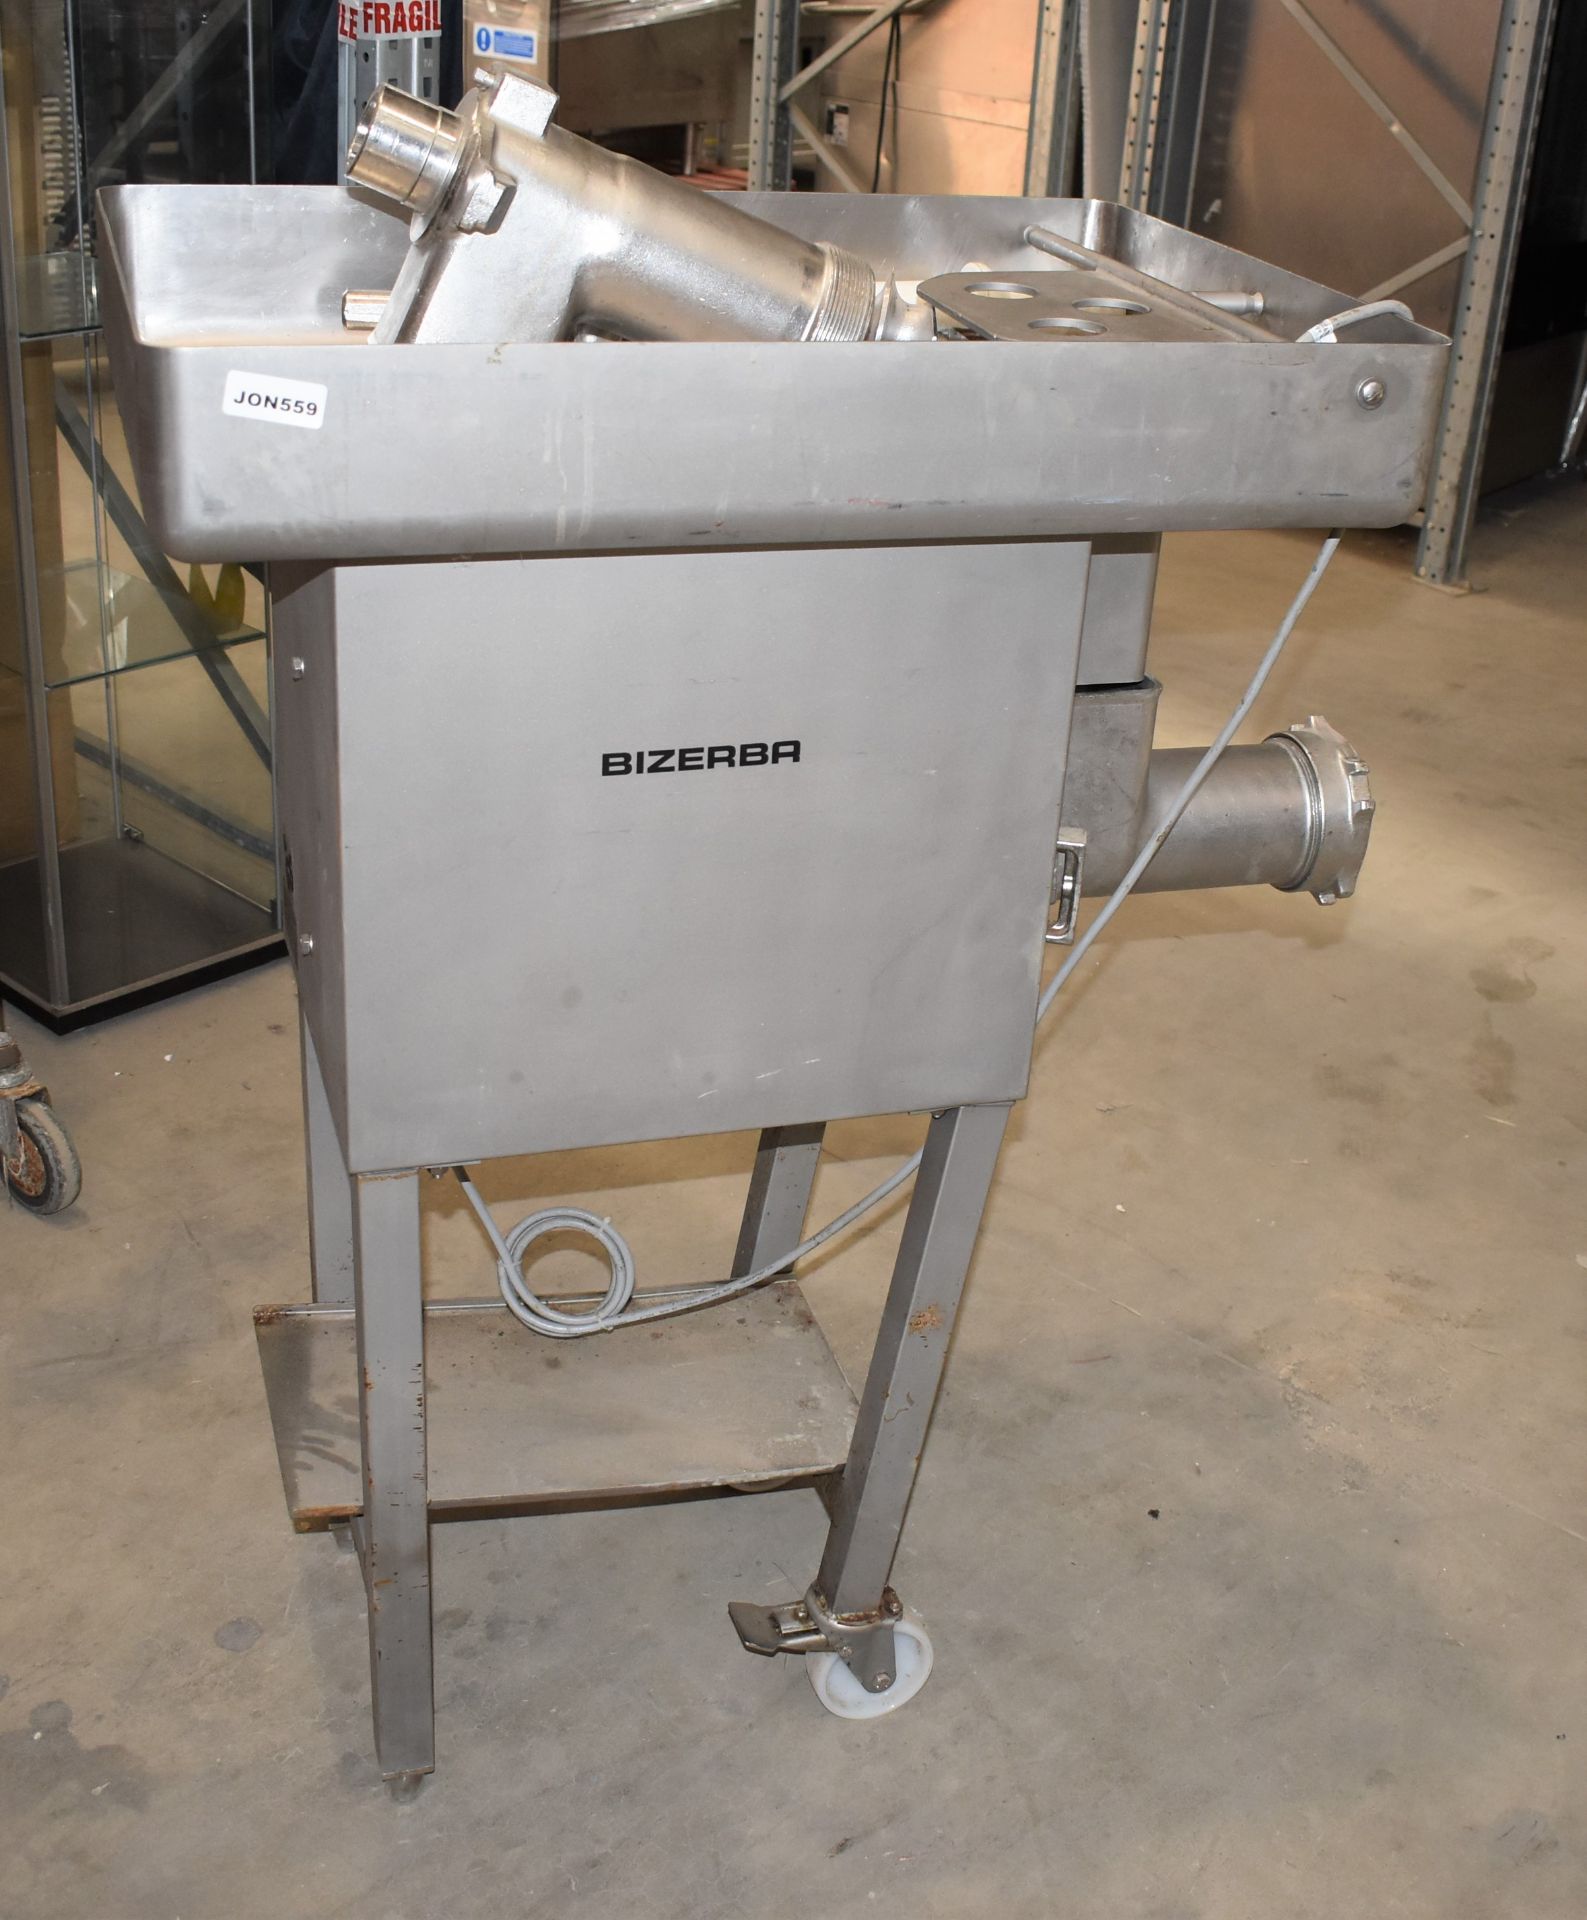 1 x Bizerba Meat Mincer - With Stand and Various Accessories - Model FW-N32S/2 - 3 Phase - Image 2 of 14